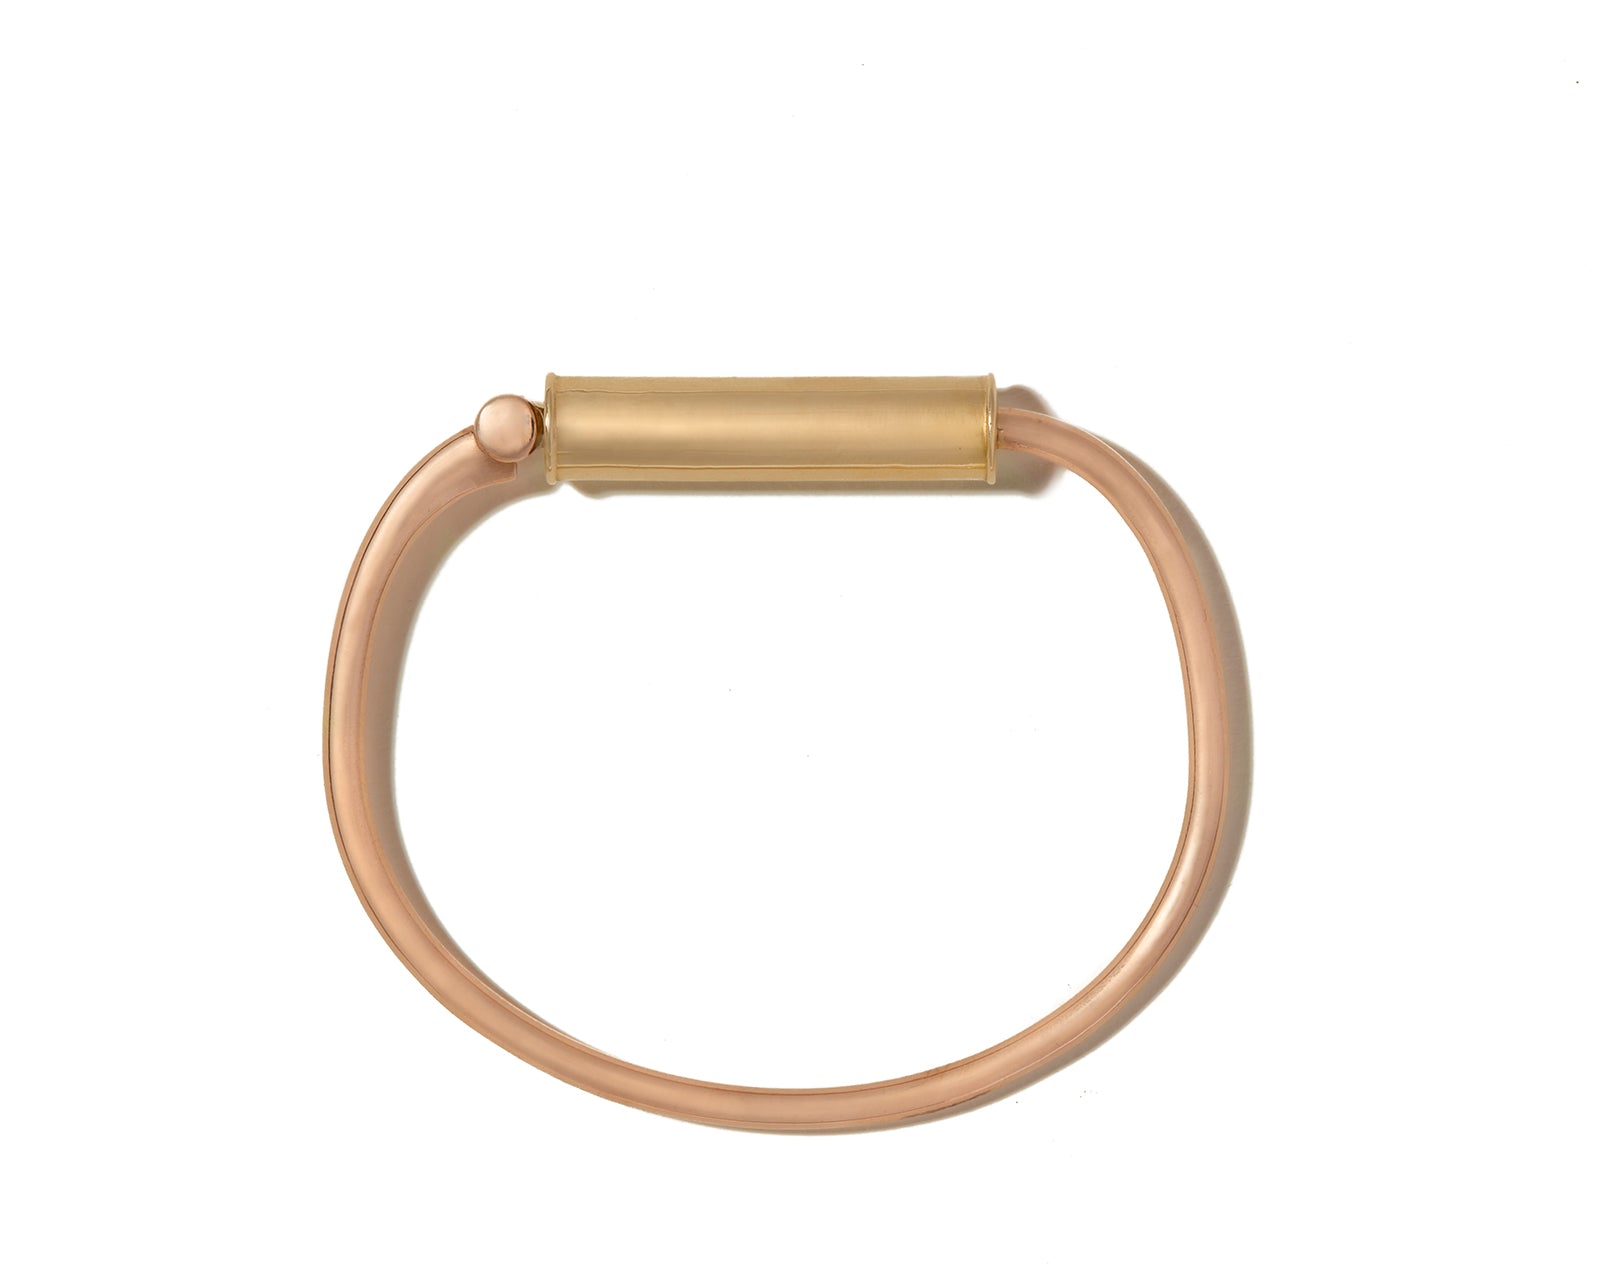 Rose gold spin bracelet with yellow gold clasp